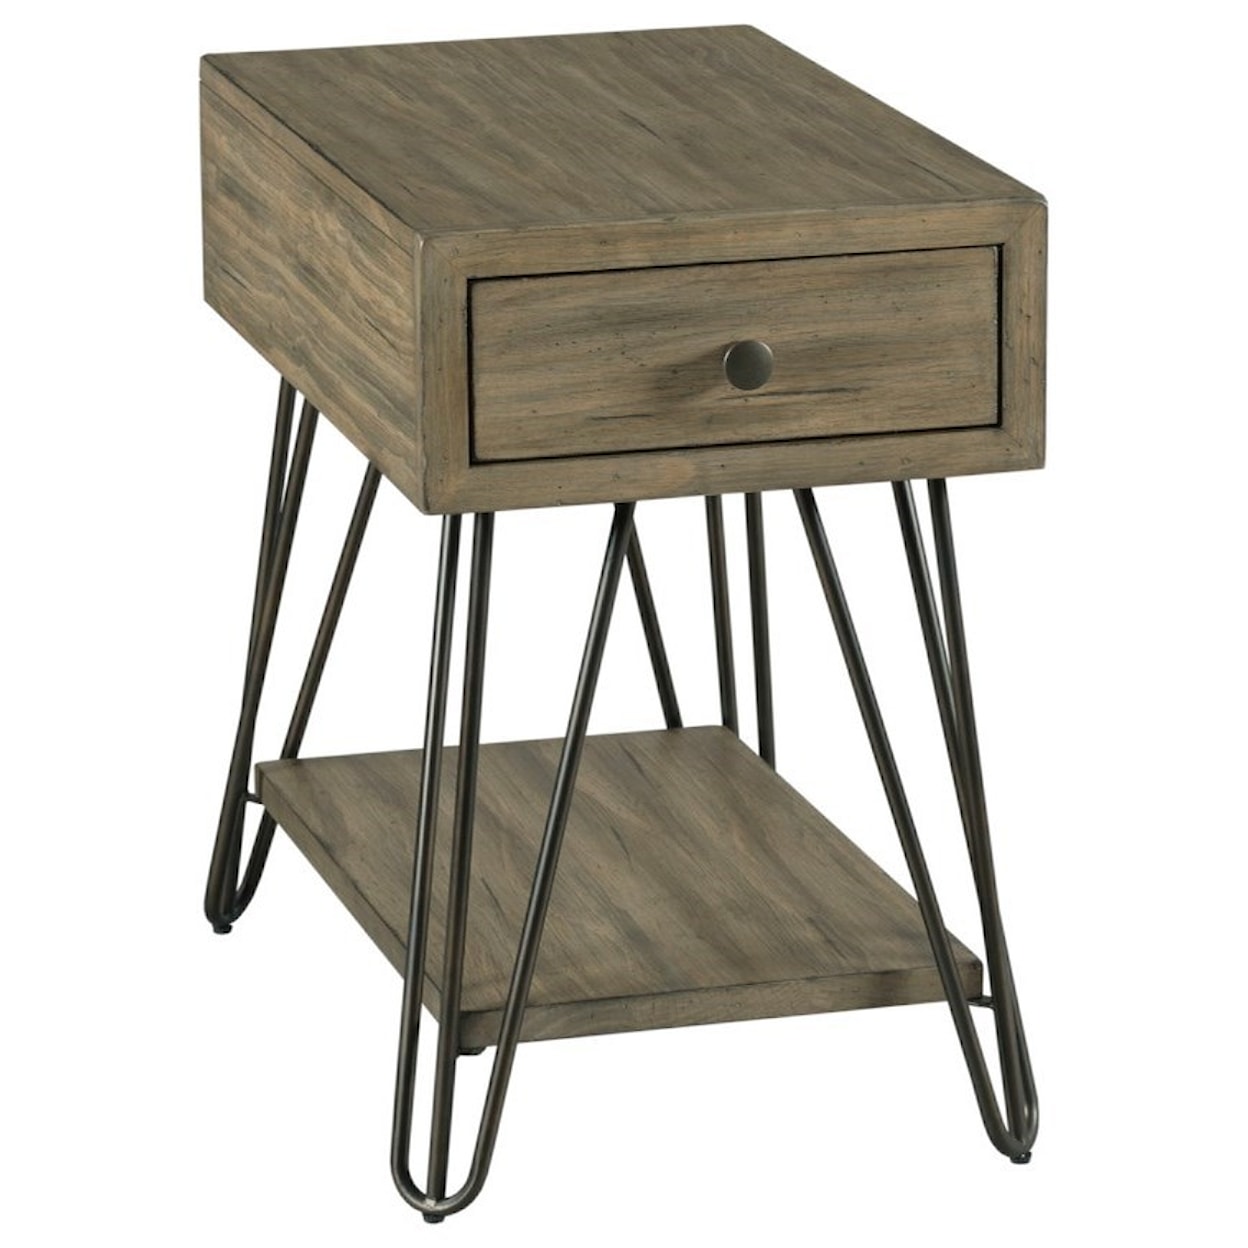 Hammary Sanbern Chairside Table